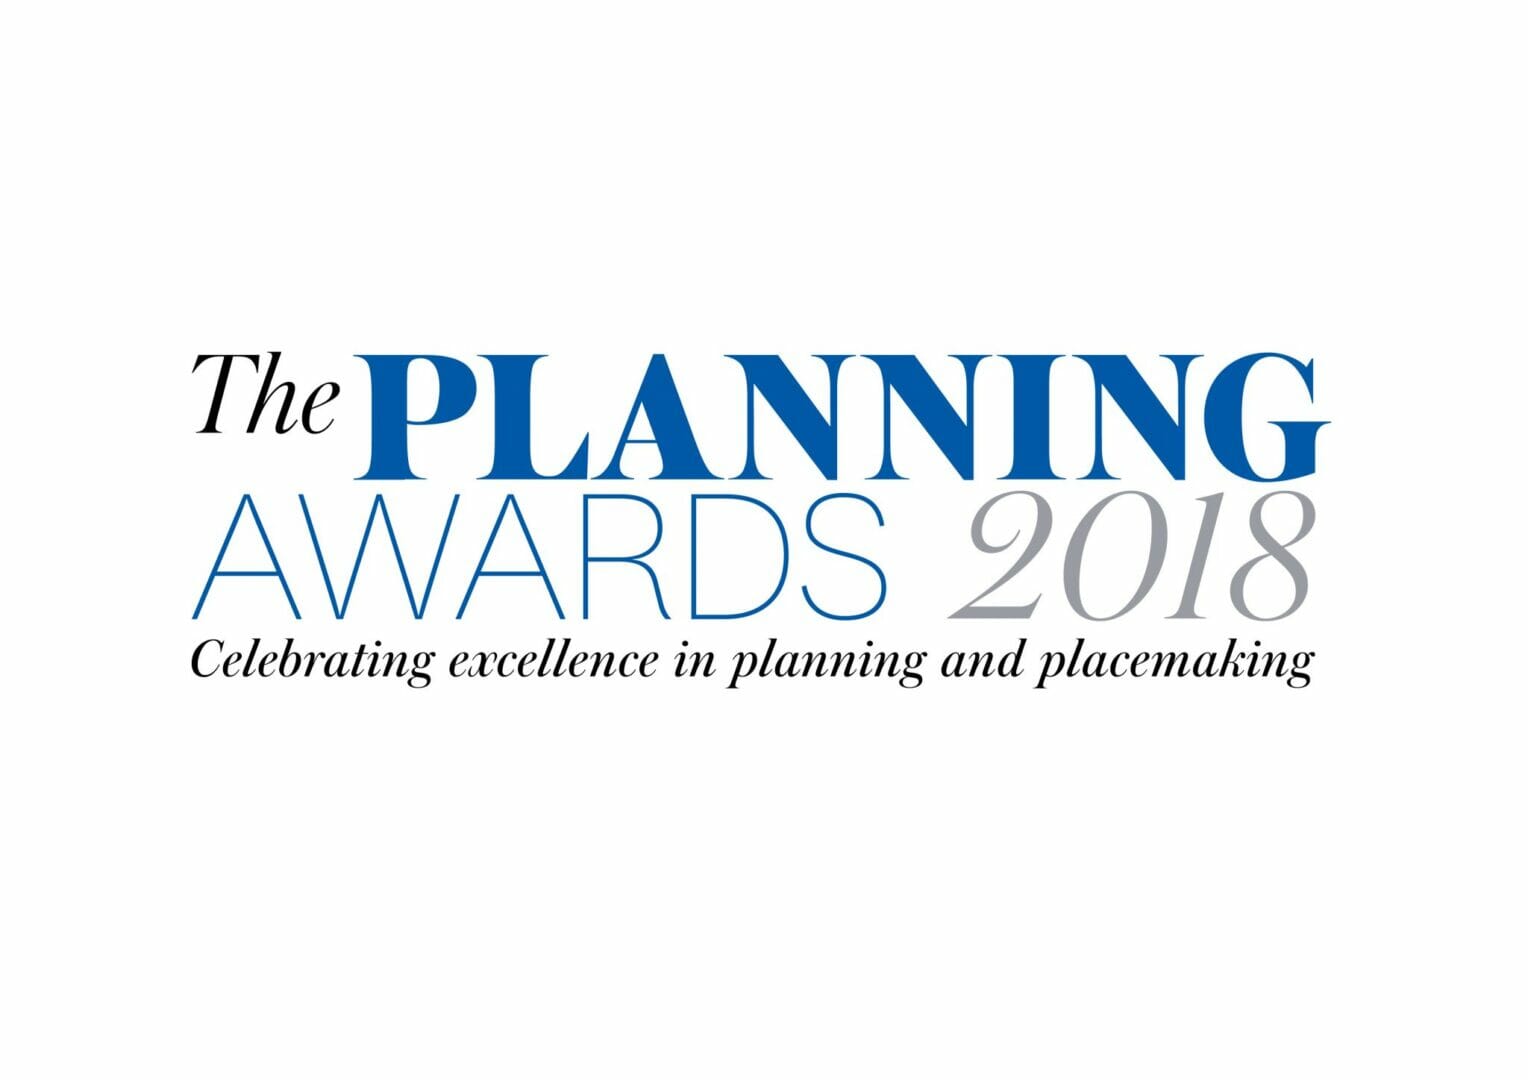 RUSSELLS PLANS FOR SUCCESS WITH SPONSORSHIP @Planning_Awards @RussellRoofTile